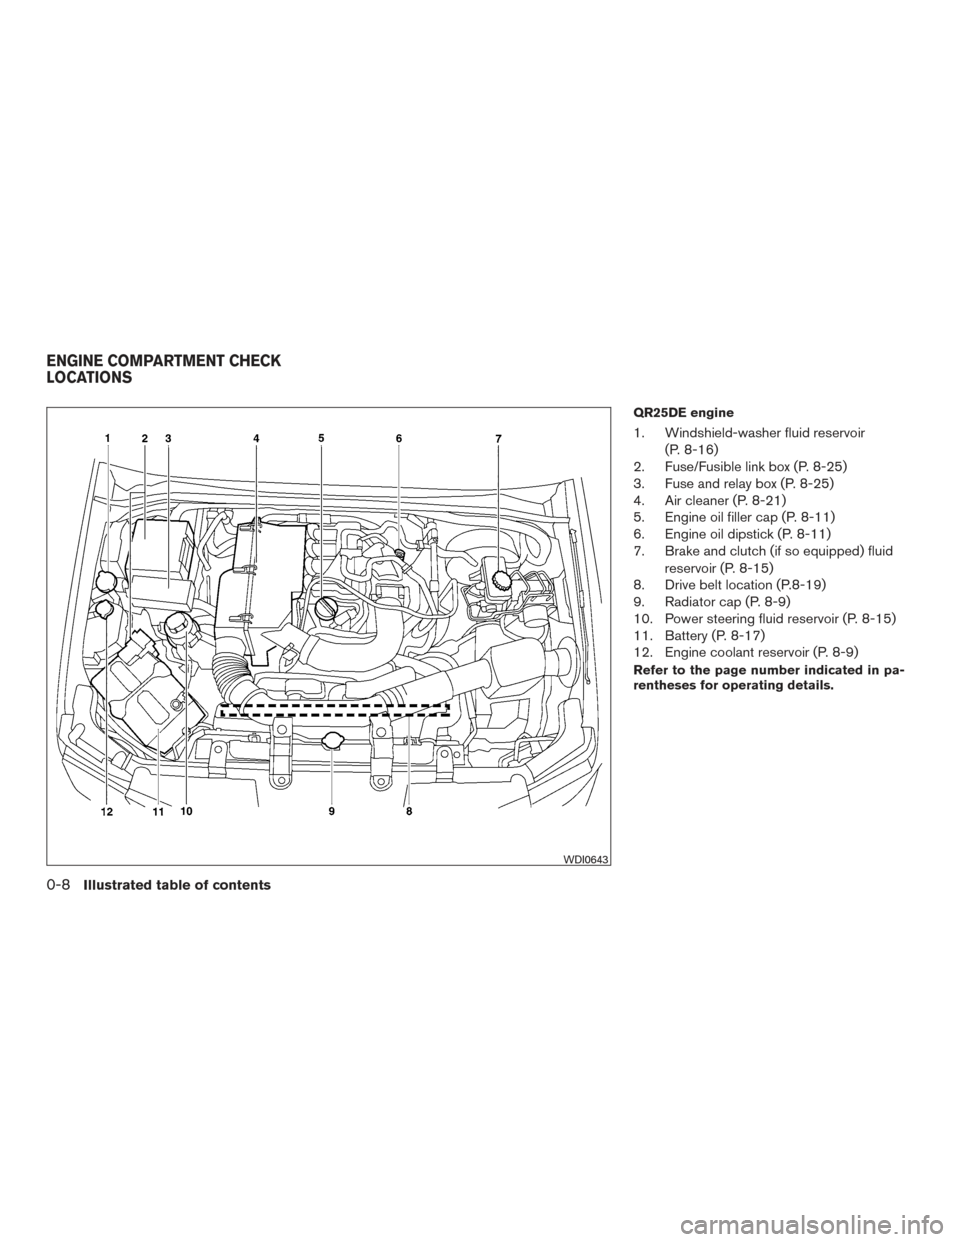 NISSAN FRONTIER 2016 D23 / 3.G User Guide QR25DE engine
1. Windshield-washer fluid reservoir(P. 8-16)
2. Fuse/Fusible link box (P. 8-25)
3. Fuse and relay box (P. 8-25)
4. Air cleaner (P. 8-21)
5. Engine oil filler cap (P. 8-11)
6. Engine oil